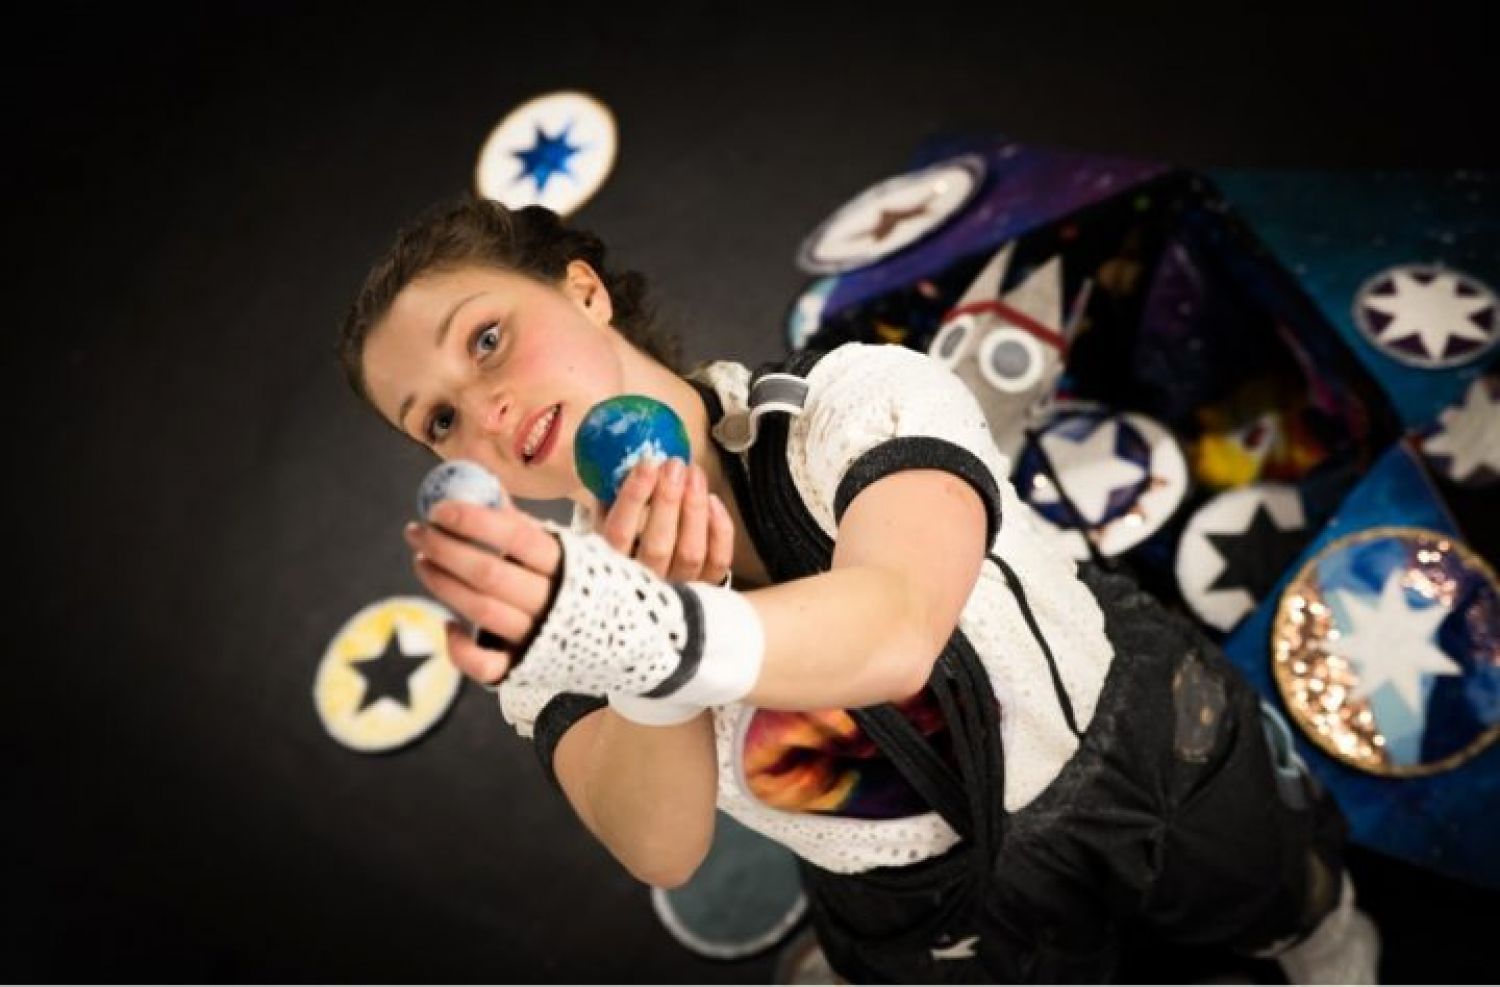 Space and Dance Combined in New Teaching Project for Primary School Children